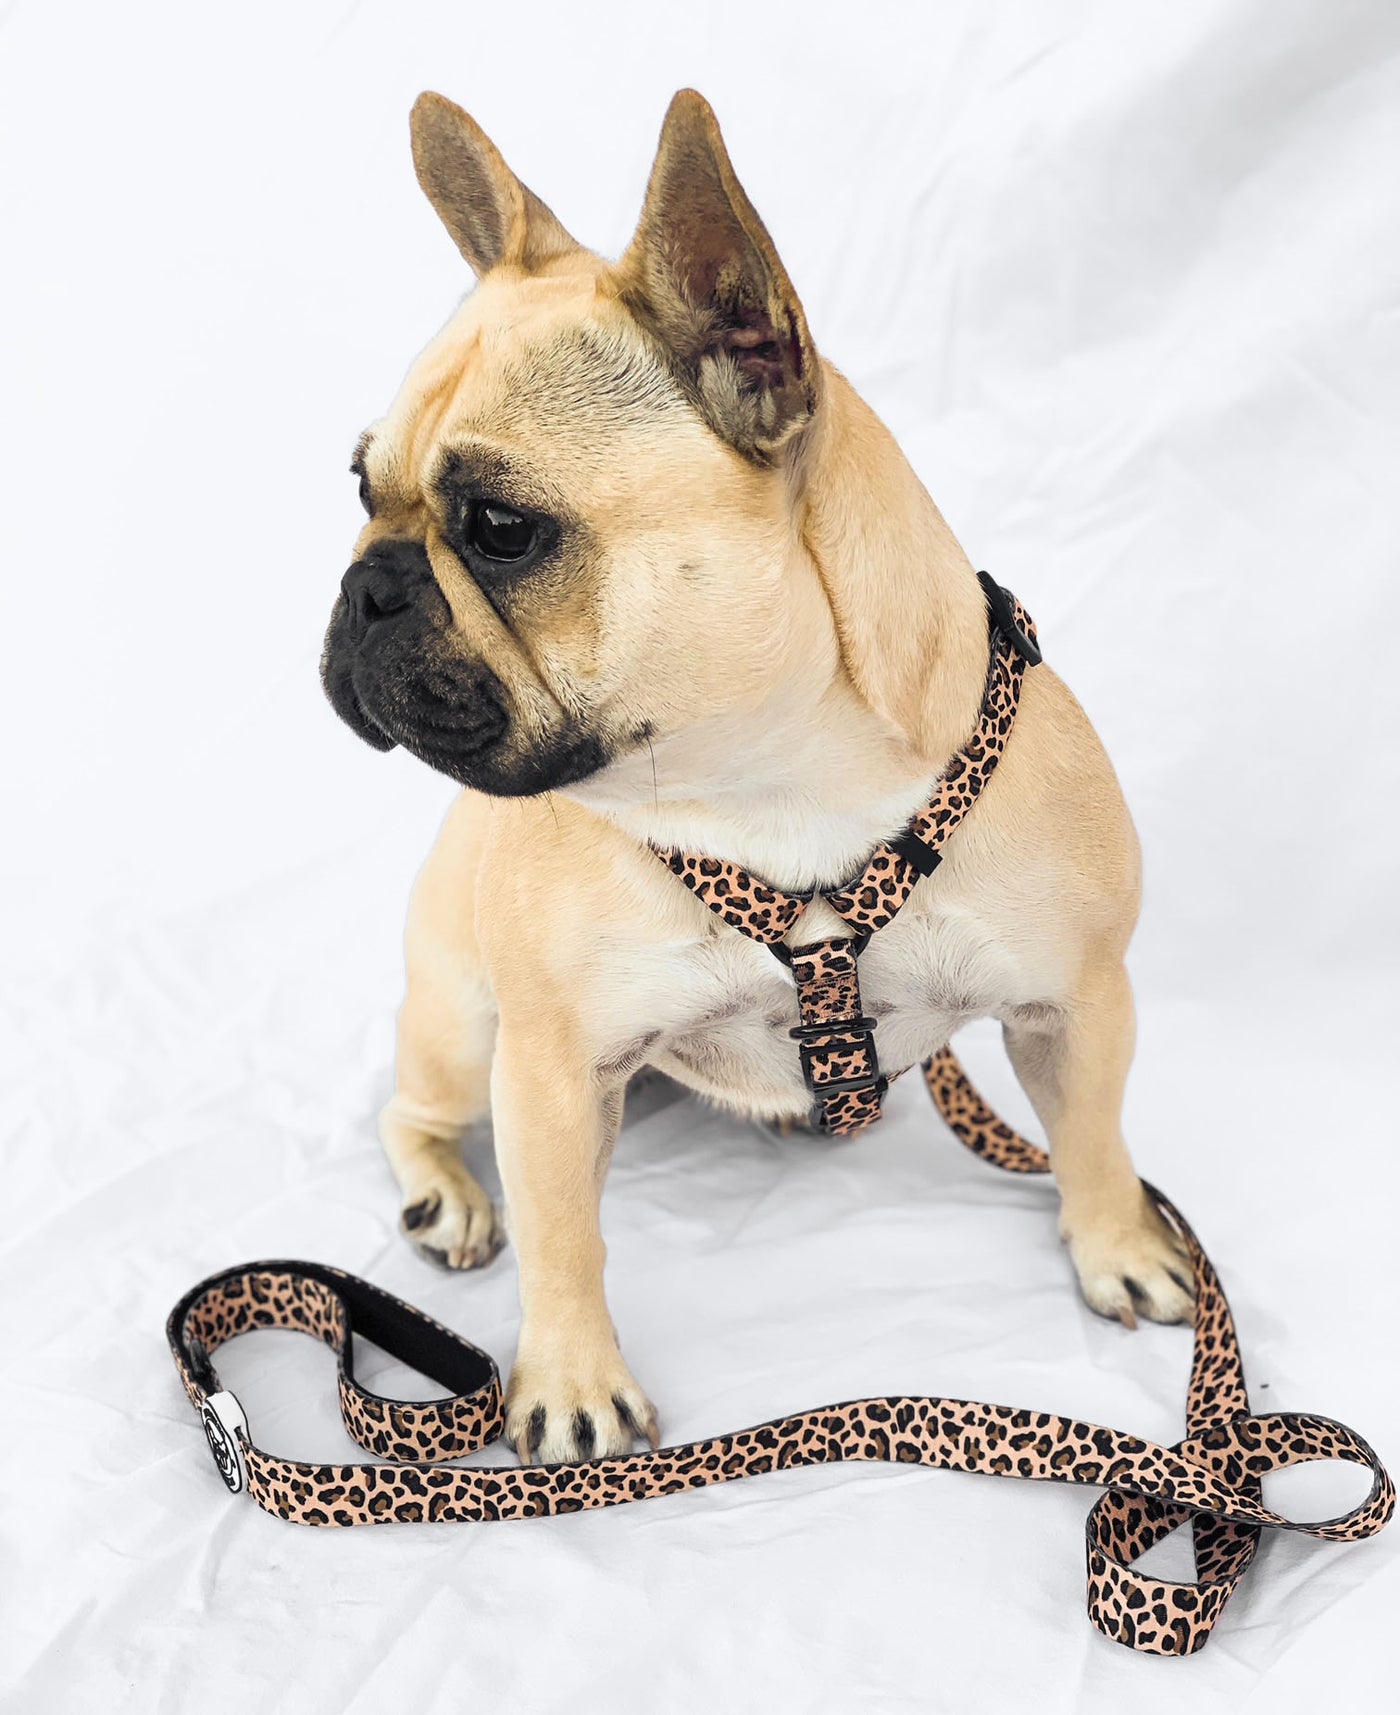 Born to be Wild - Strap Harness